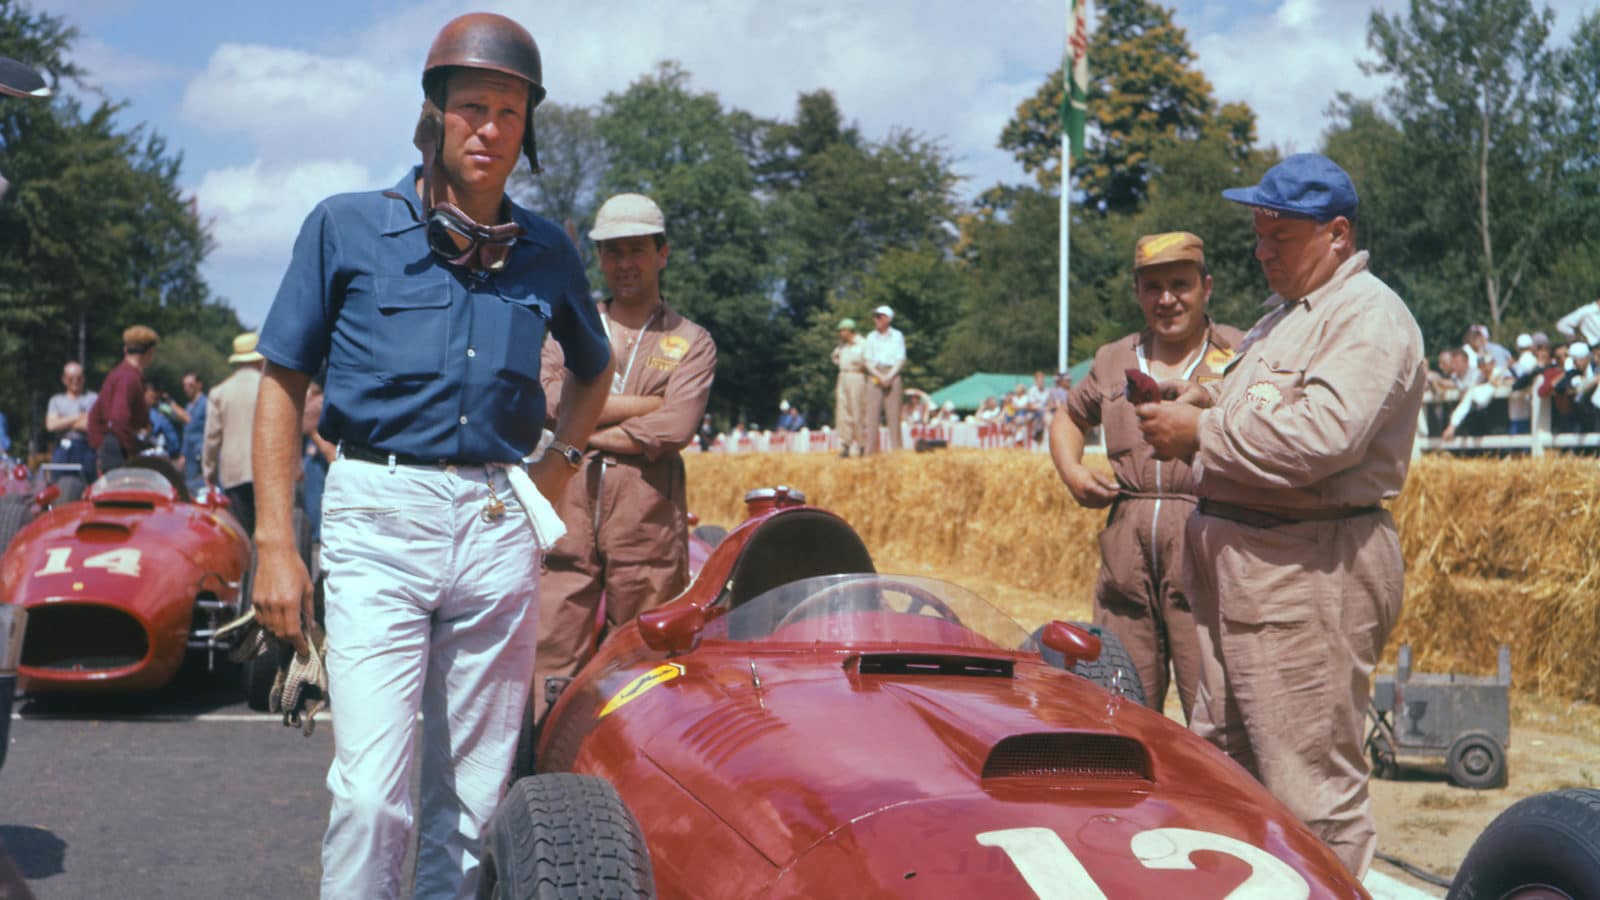 Peter Collins with Ferrari on Rouen grid in 1957